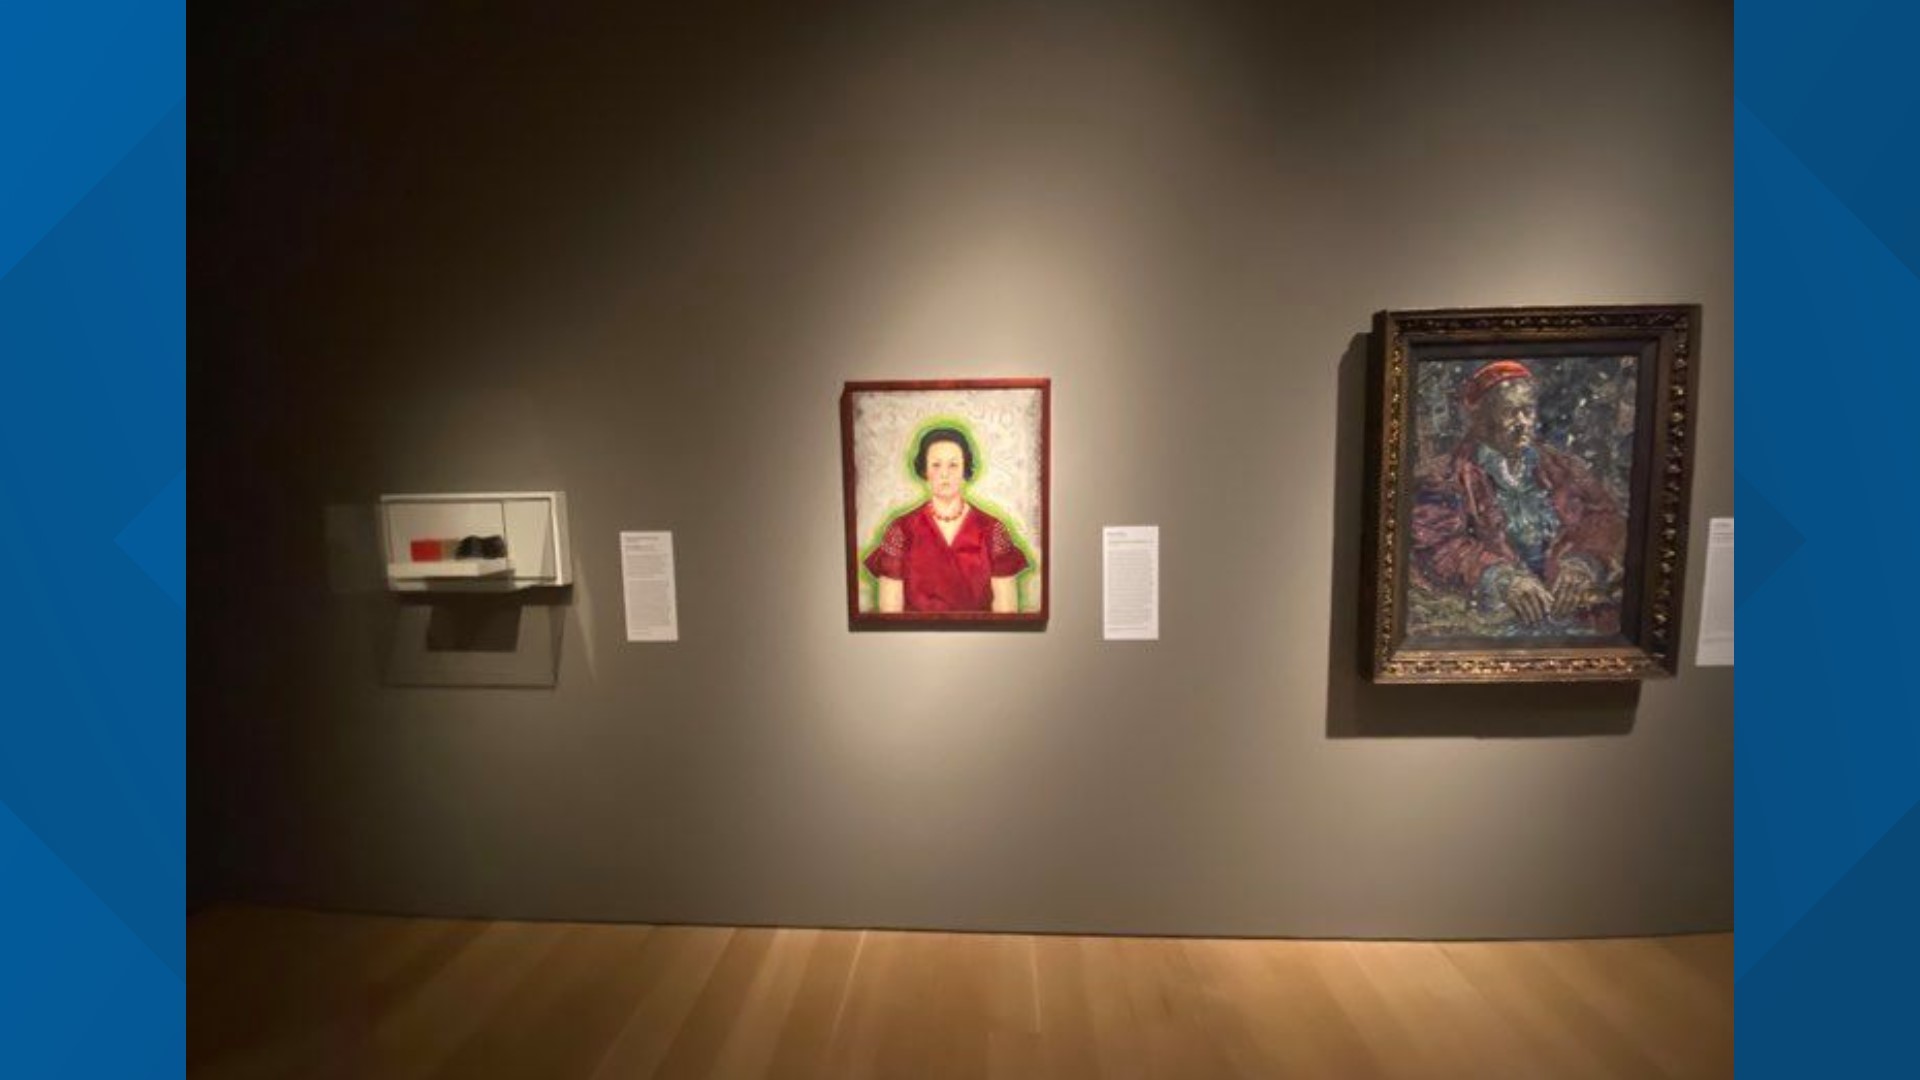 Supernatural America started Oct. 7 and explores the paranormal in American Art, with artworks of all kinds from paintings and sculptures to videos and photos.